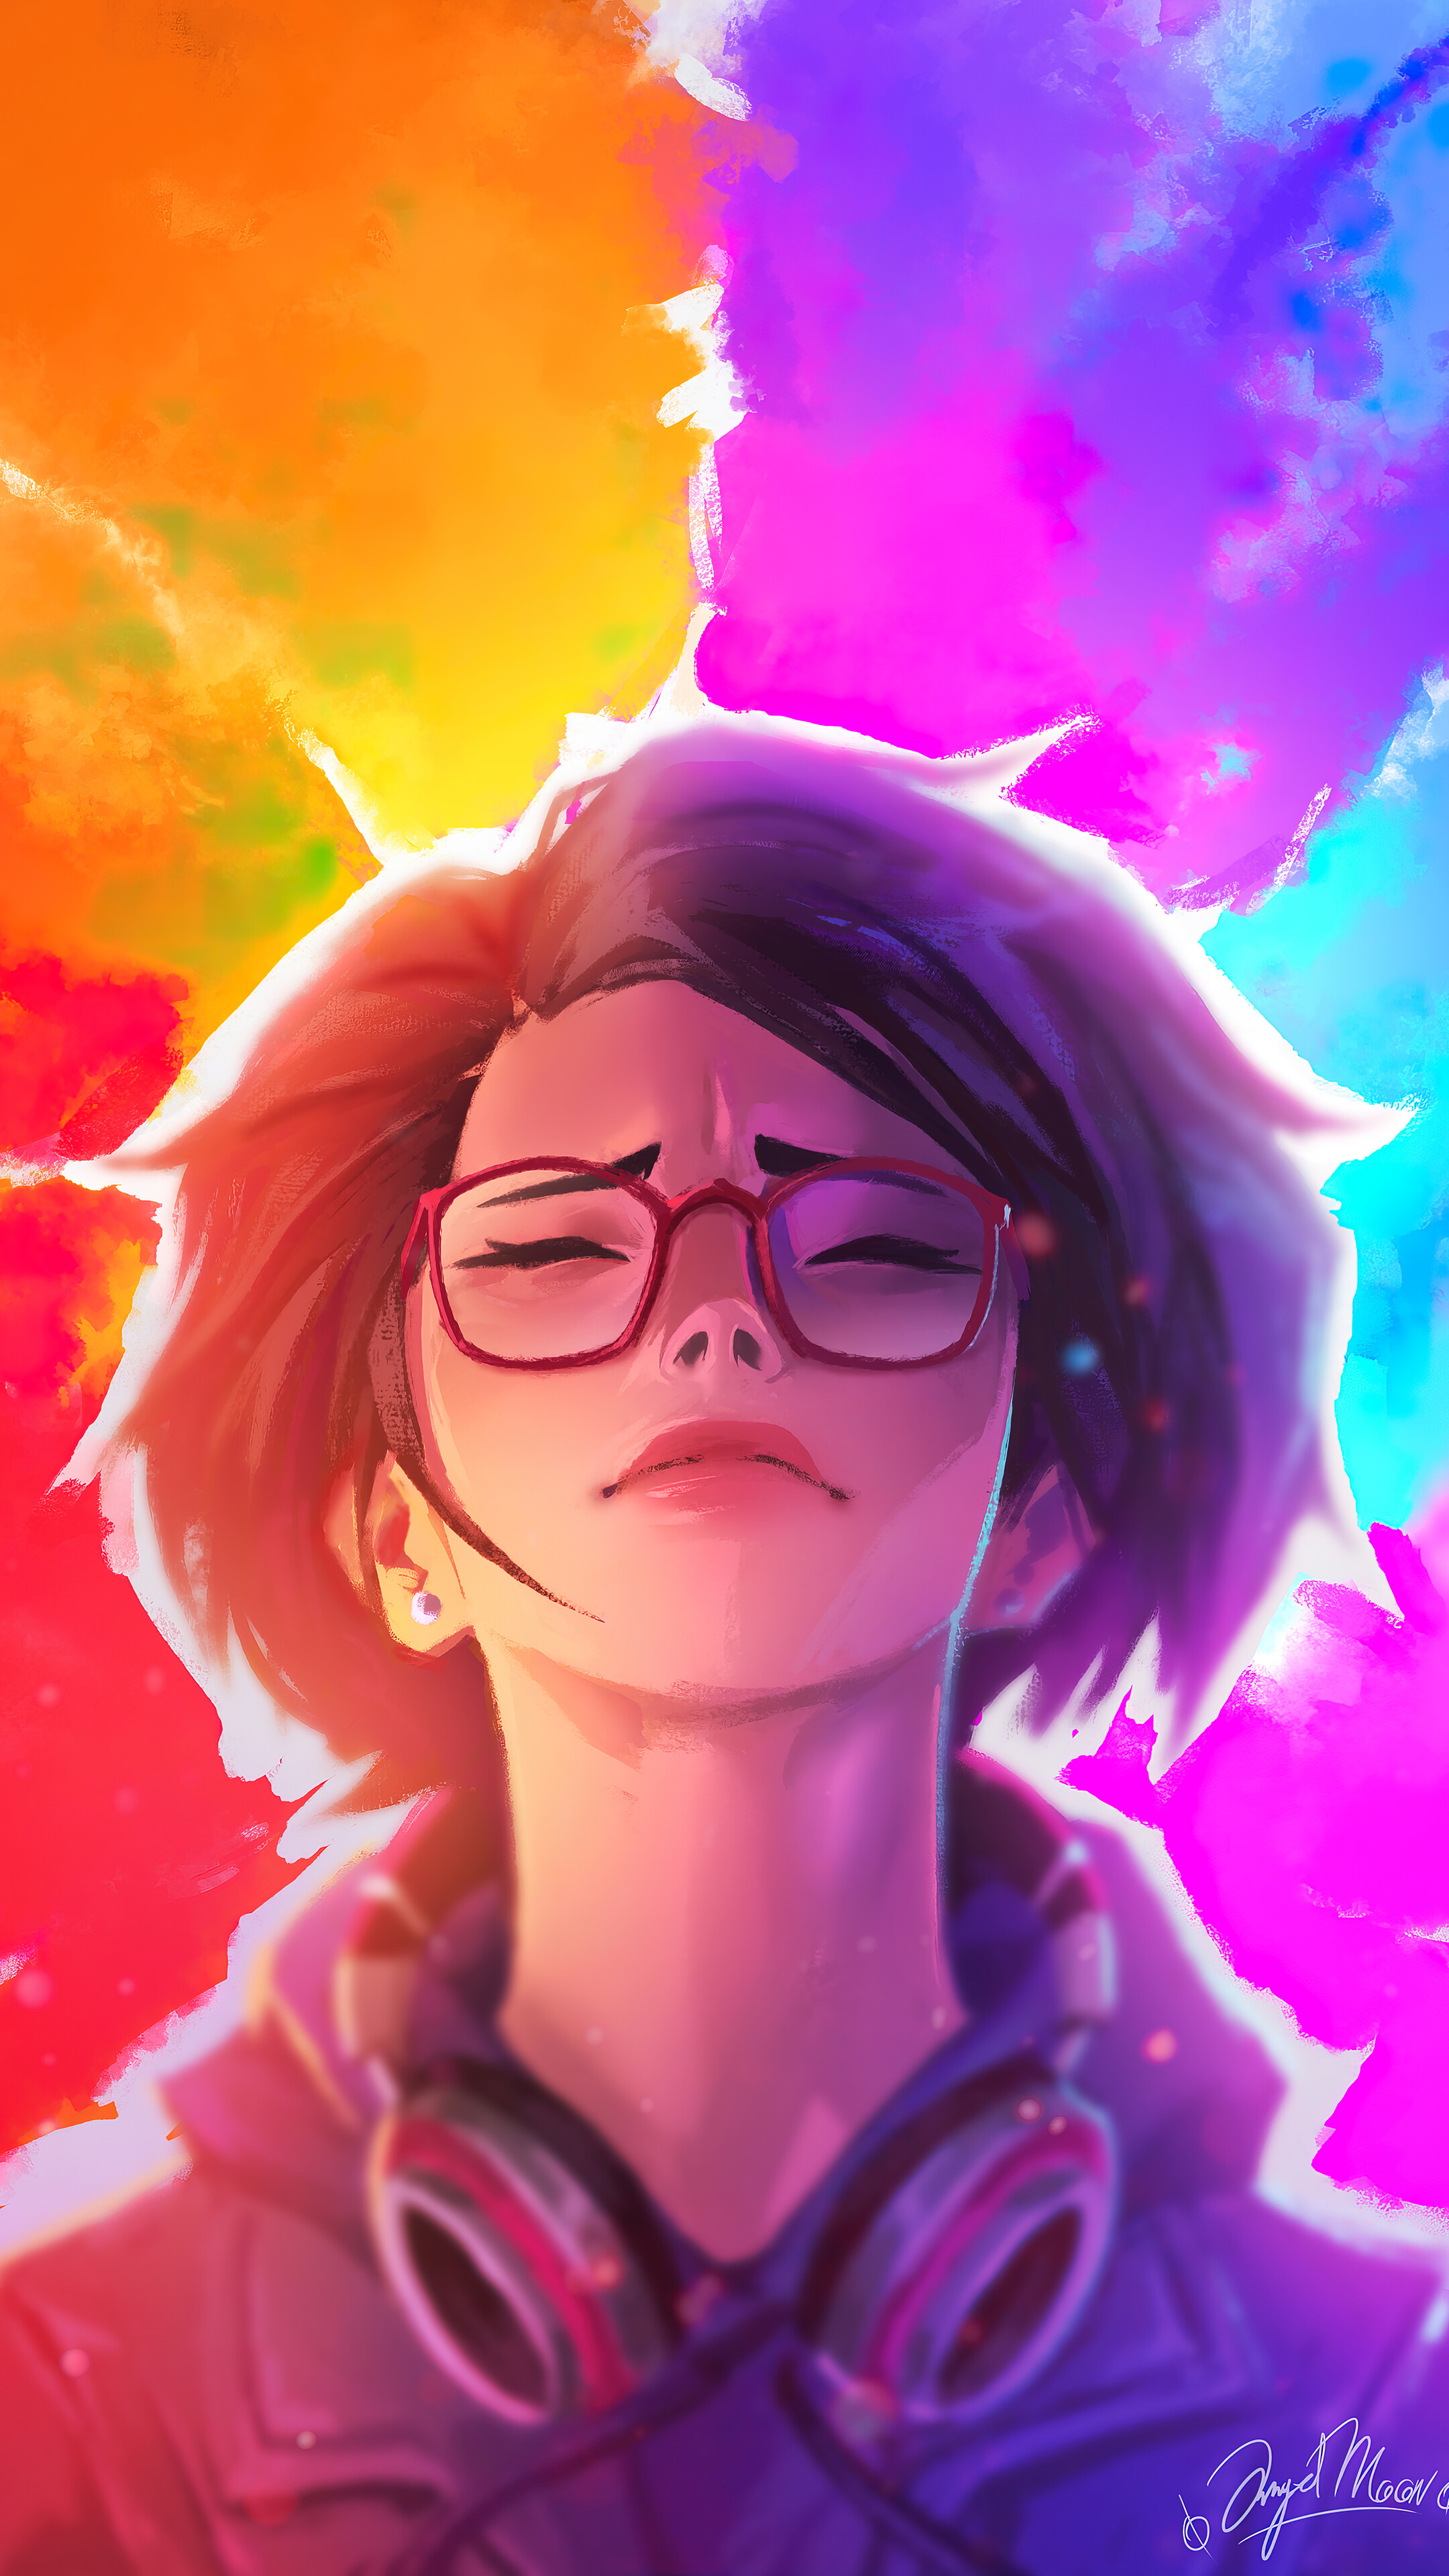 Life Is Strange: True Colors  Background Wallpapers